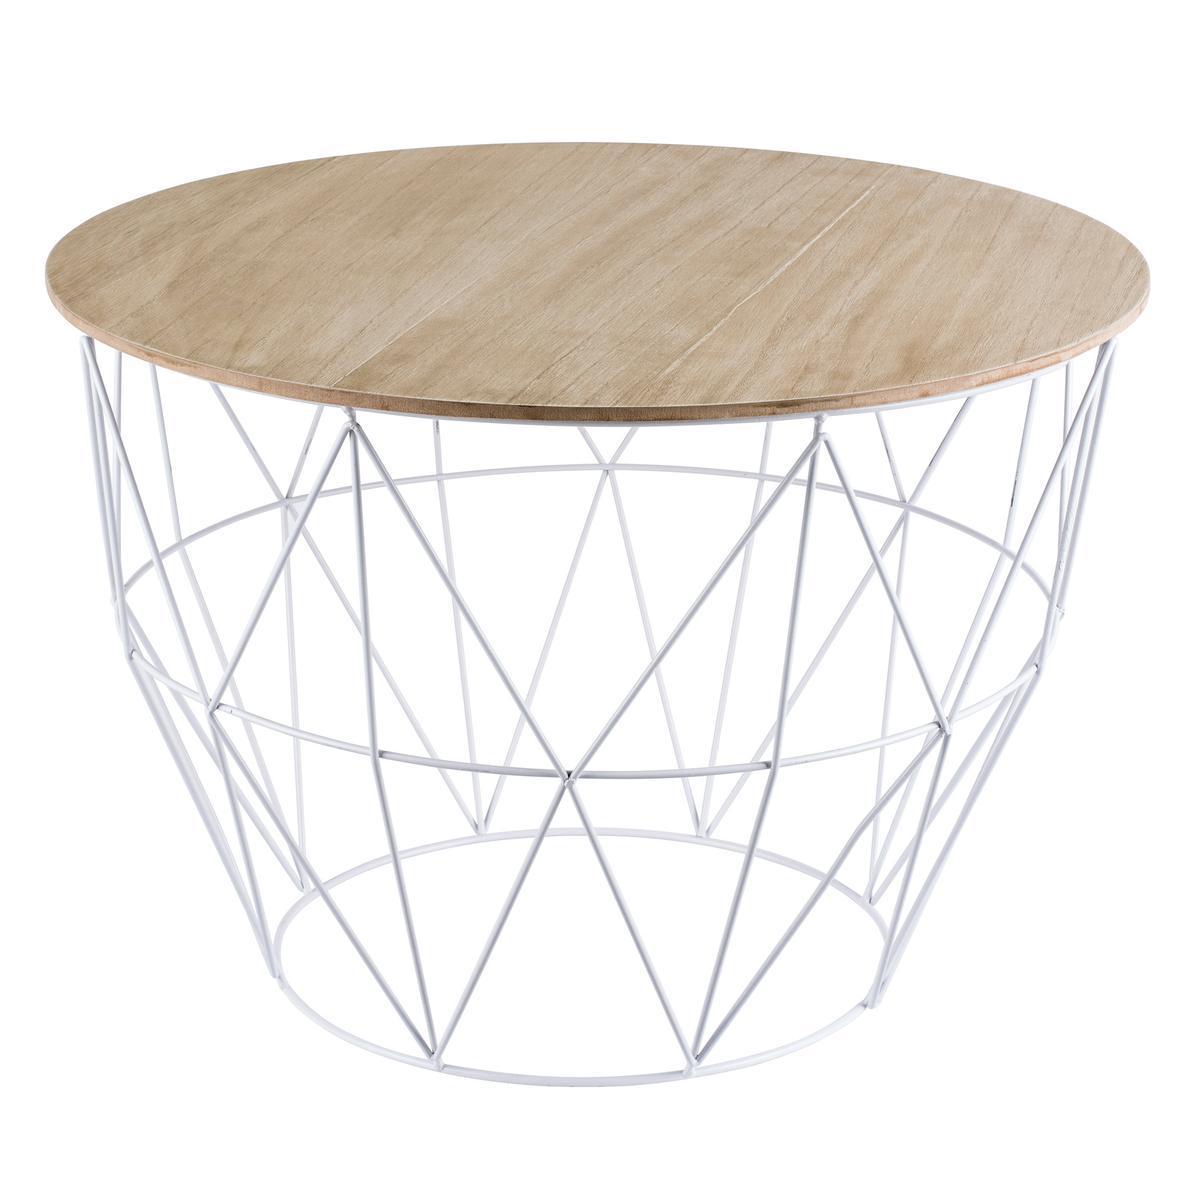 Table d'appoint panier - Blanc